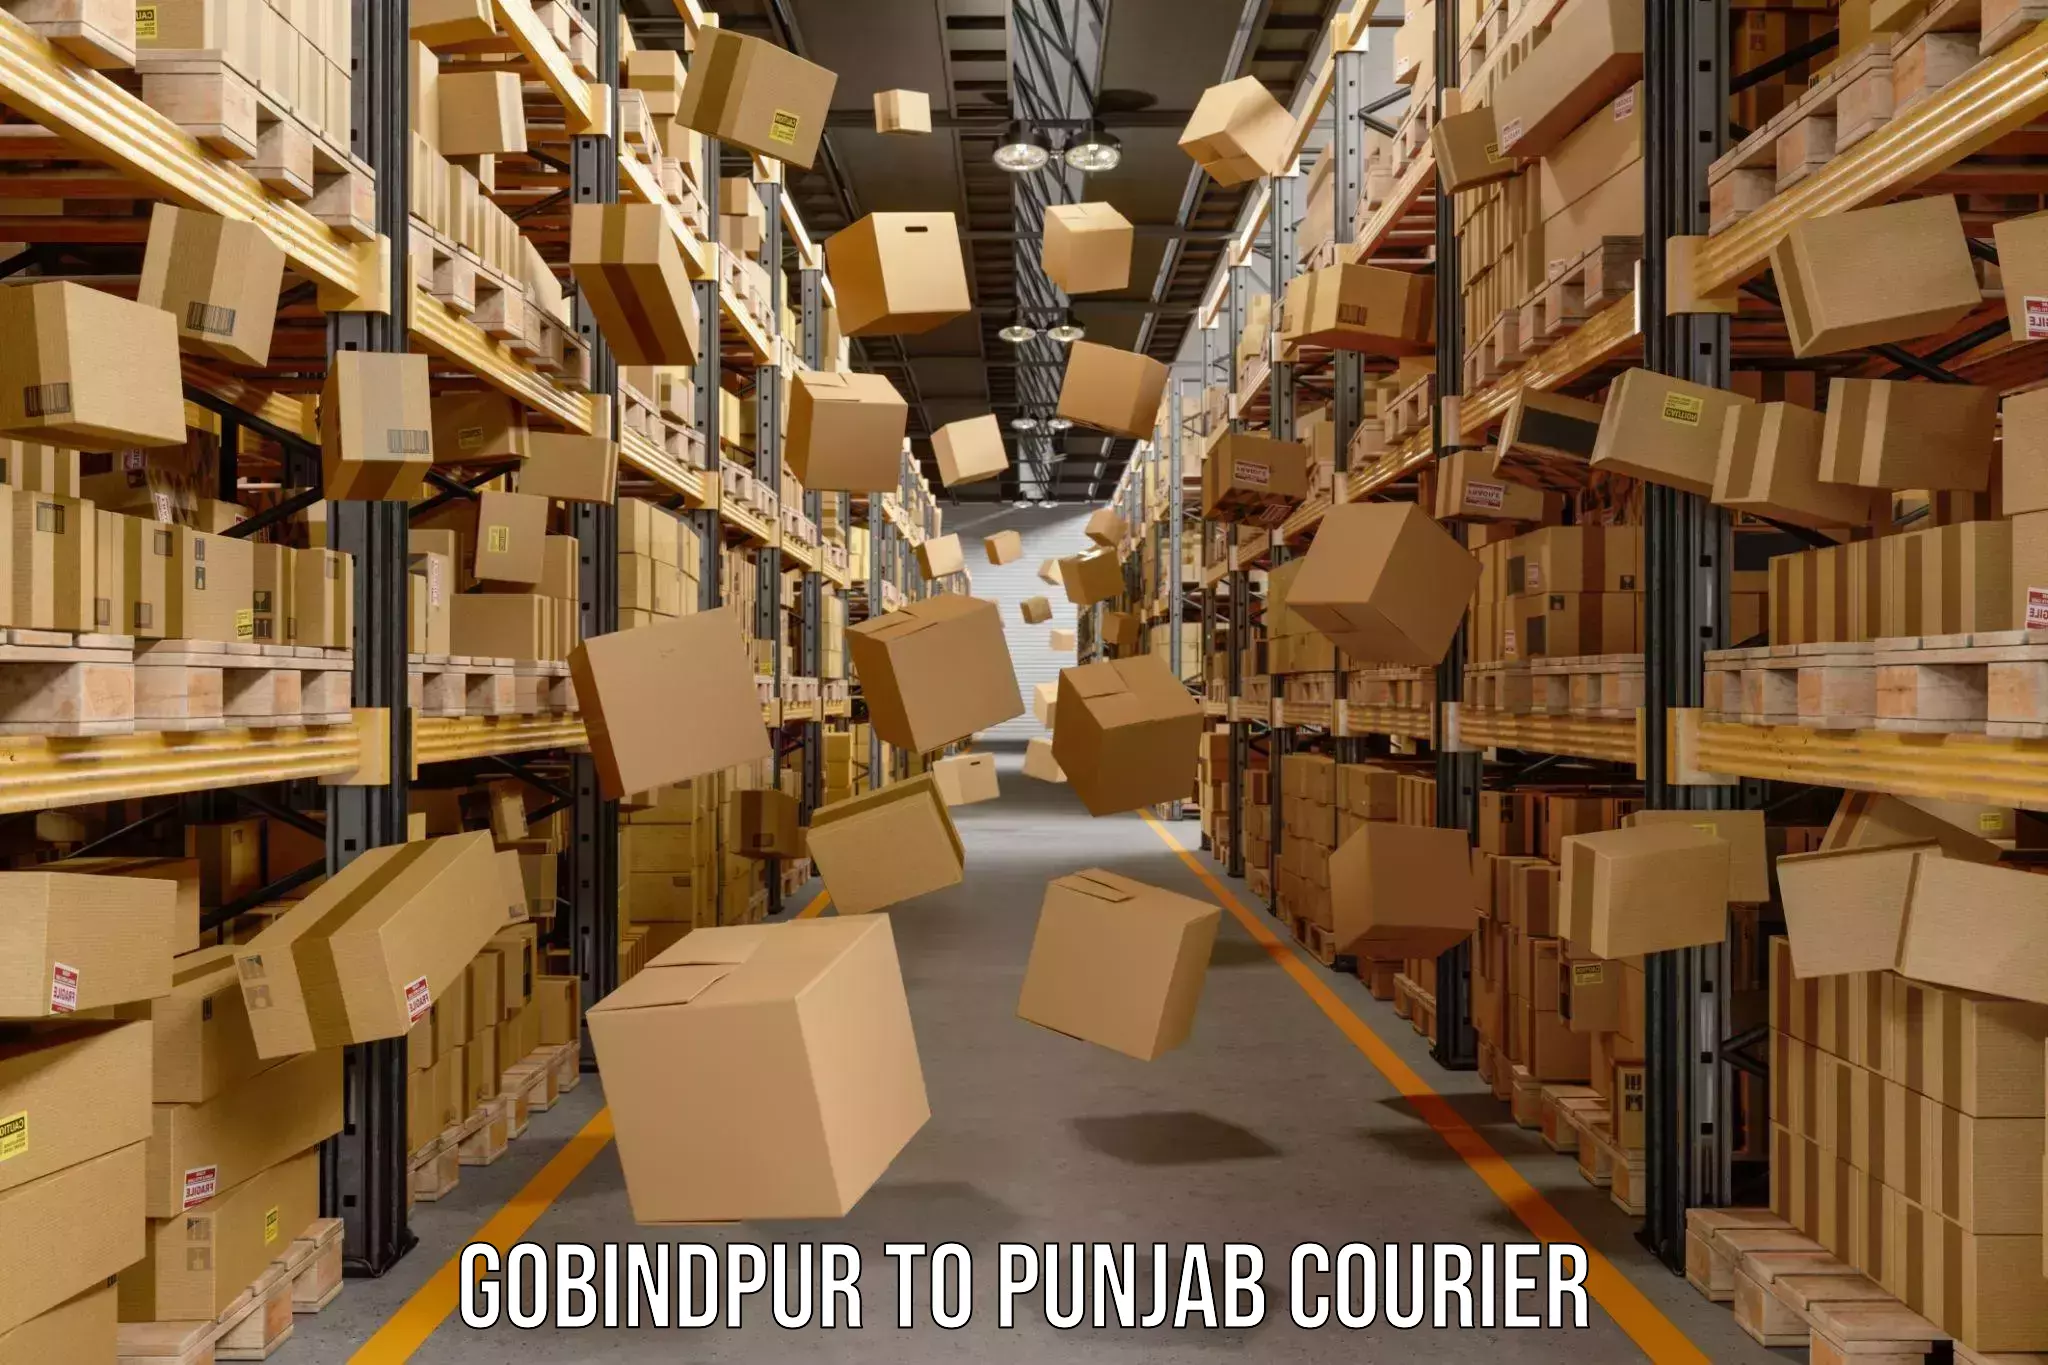 Round-the-clock parcel delivery Gobindpur to Punjab